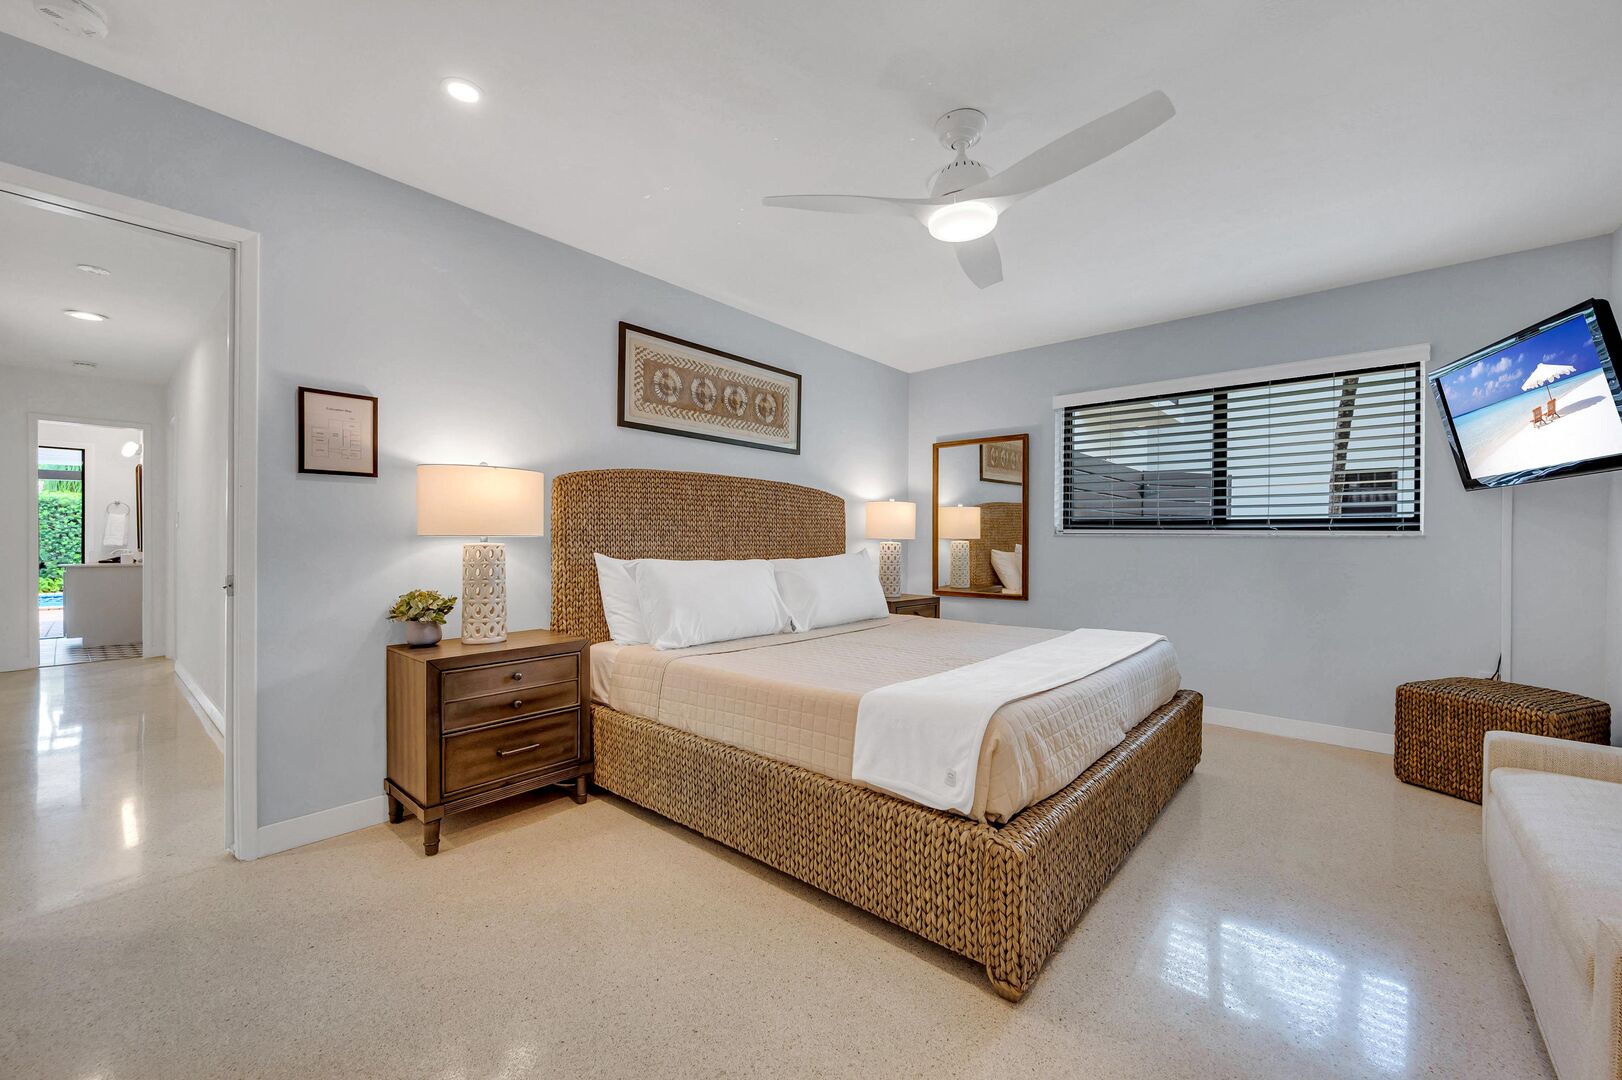 The spacious primary bedroom boasts a king size bed, en-suite bathroom and a smart TV.